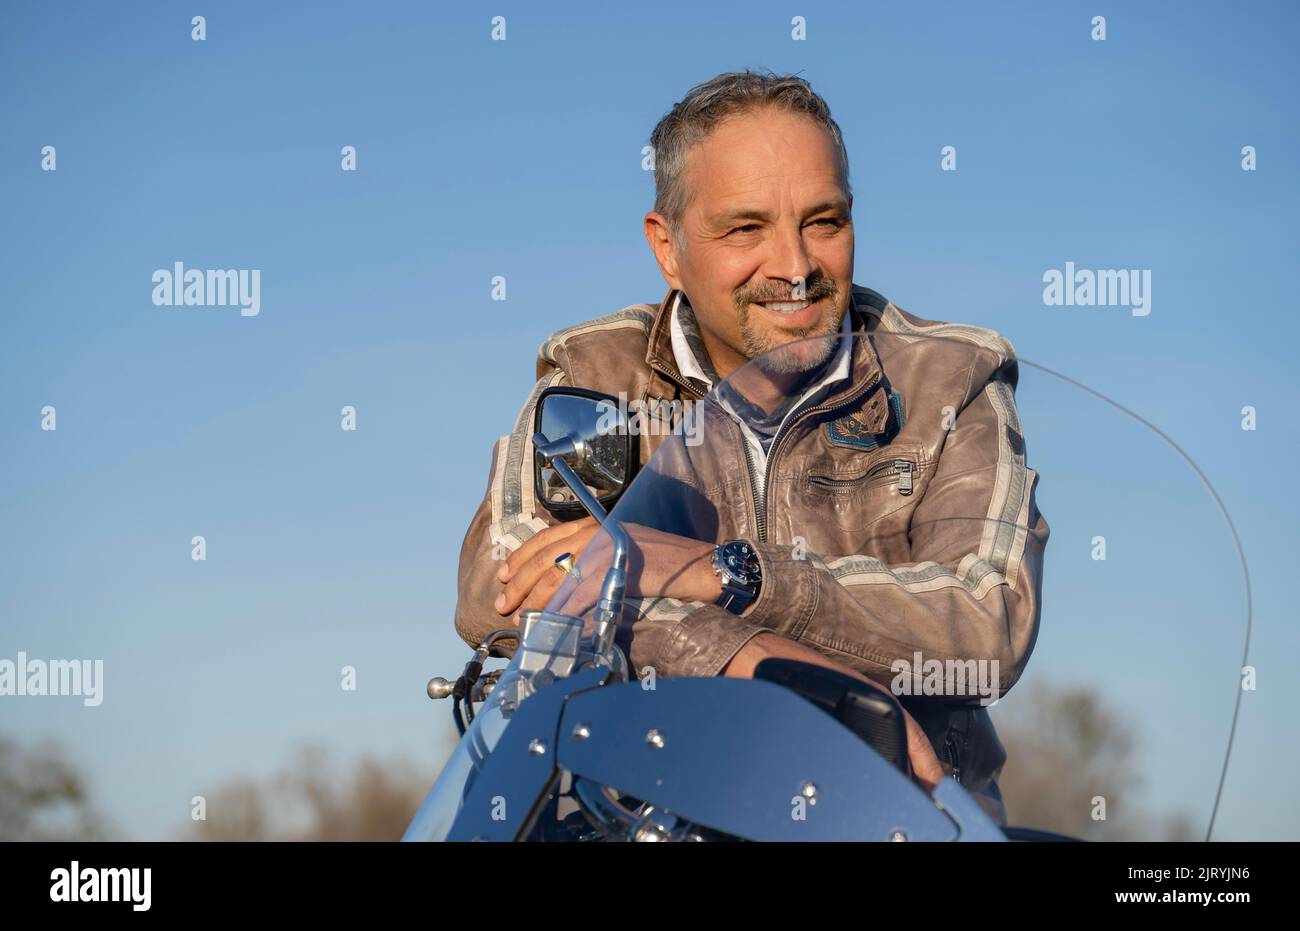 Middle-aged man with leather jacket standing by motorbike, Karlsruhe, Germany Stock Photo